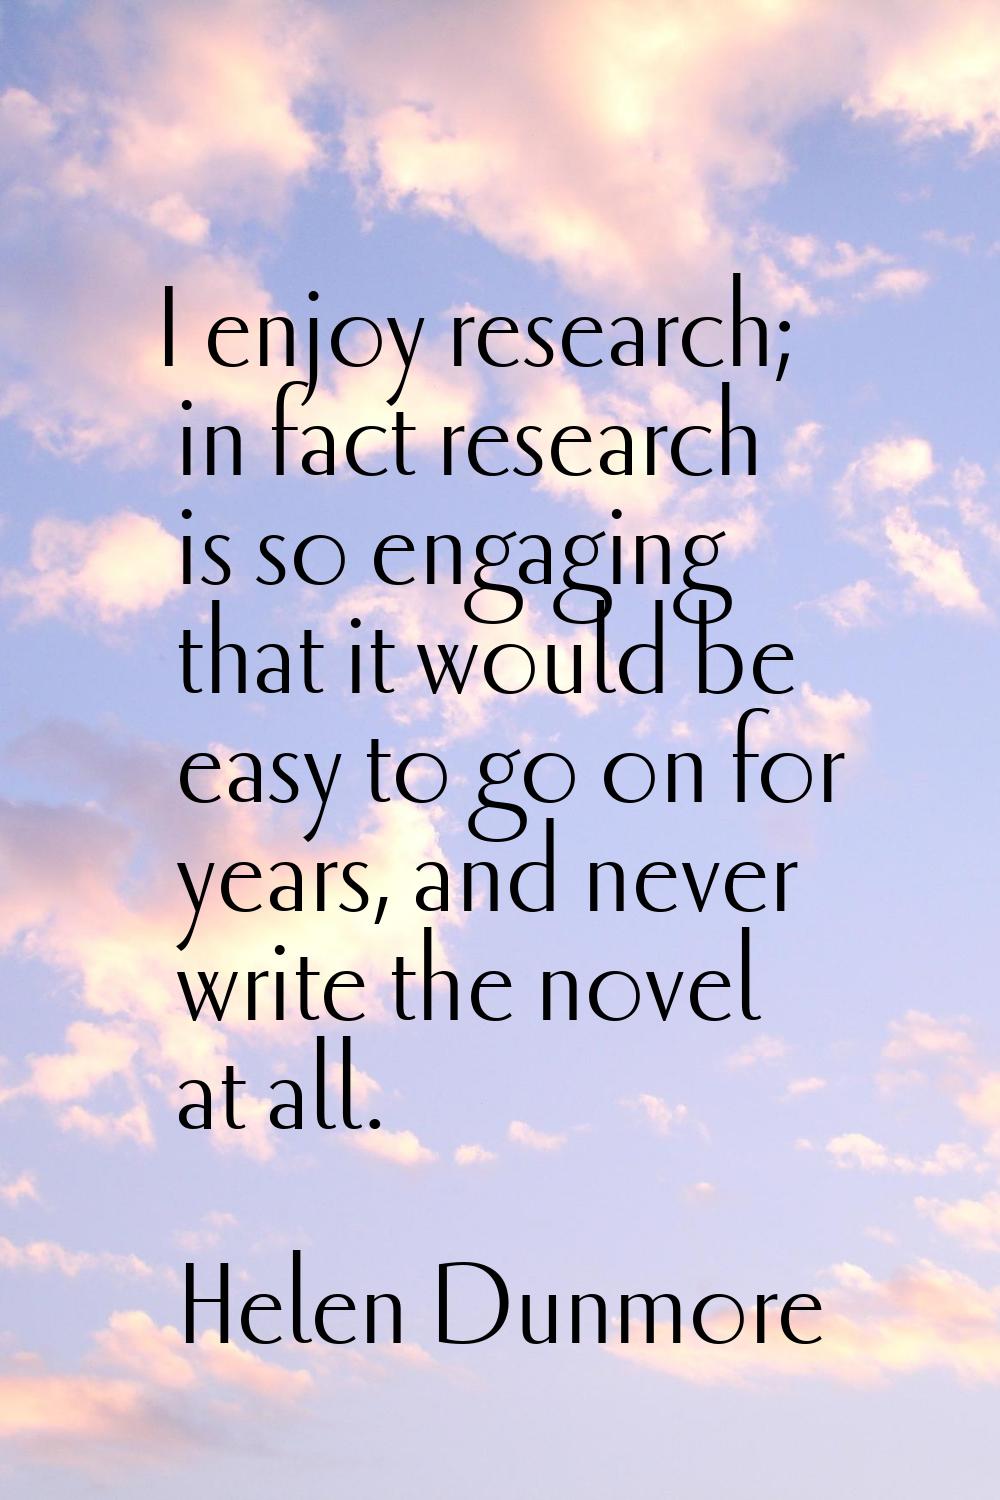 I enjoy research; in fact research is so engaging that it would be easy to go on for years, and nev